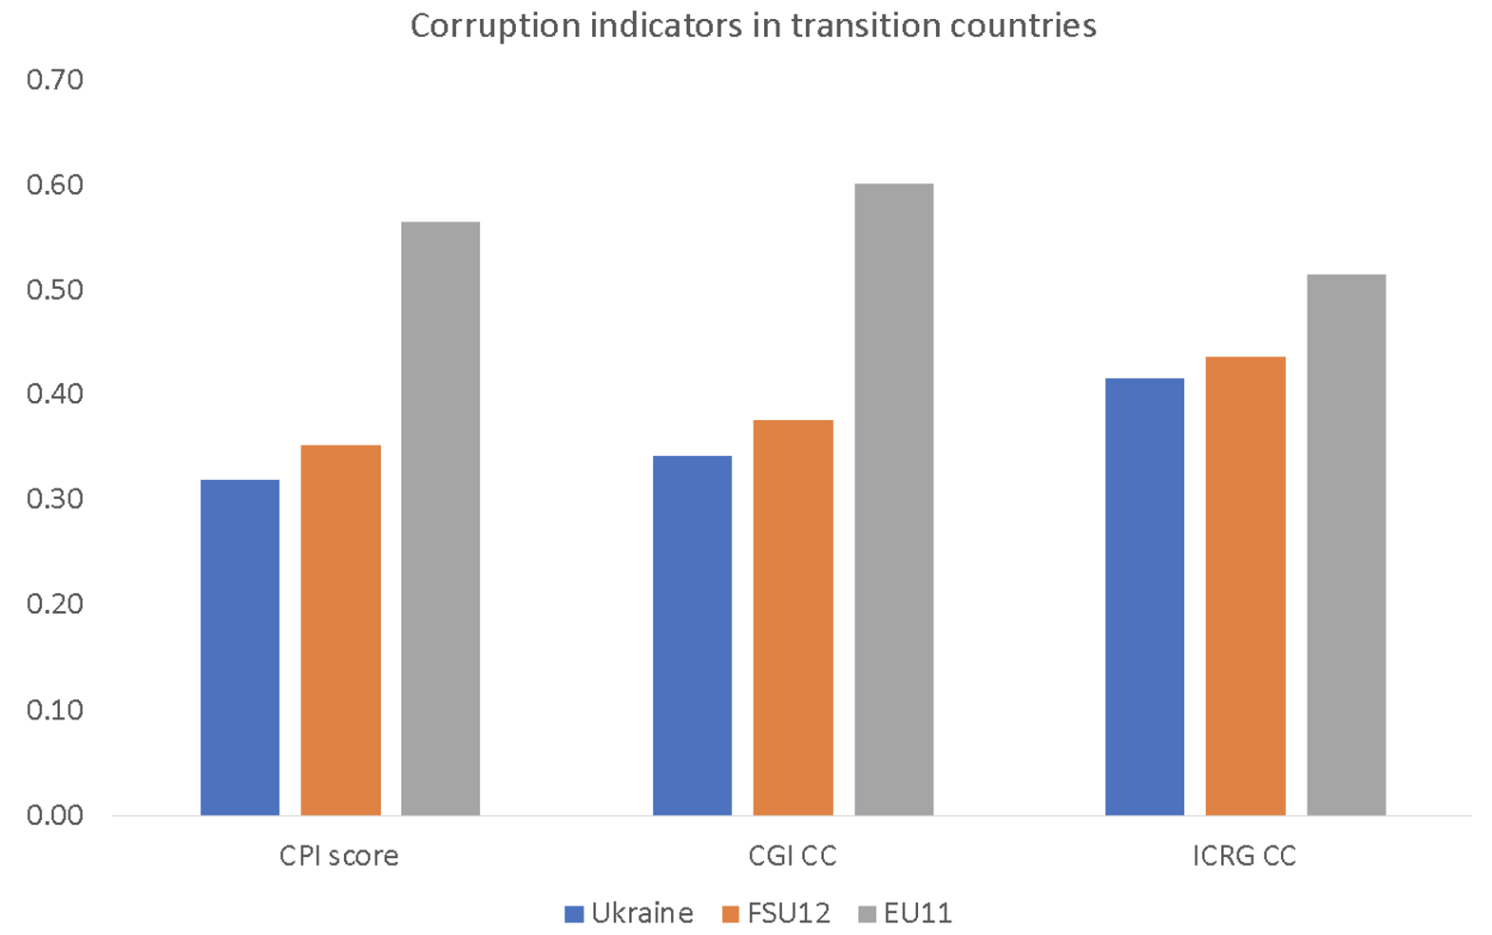 Figure 1 Corruption indicators for transition countries